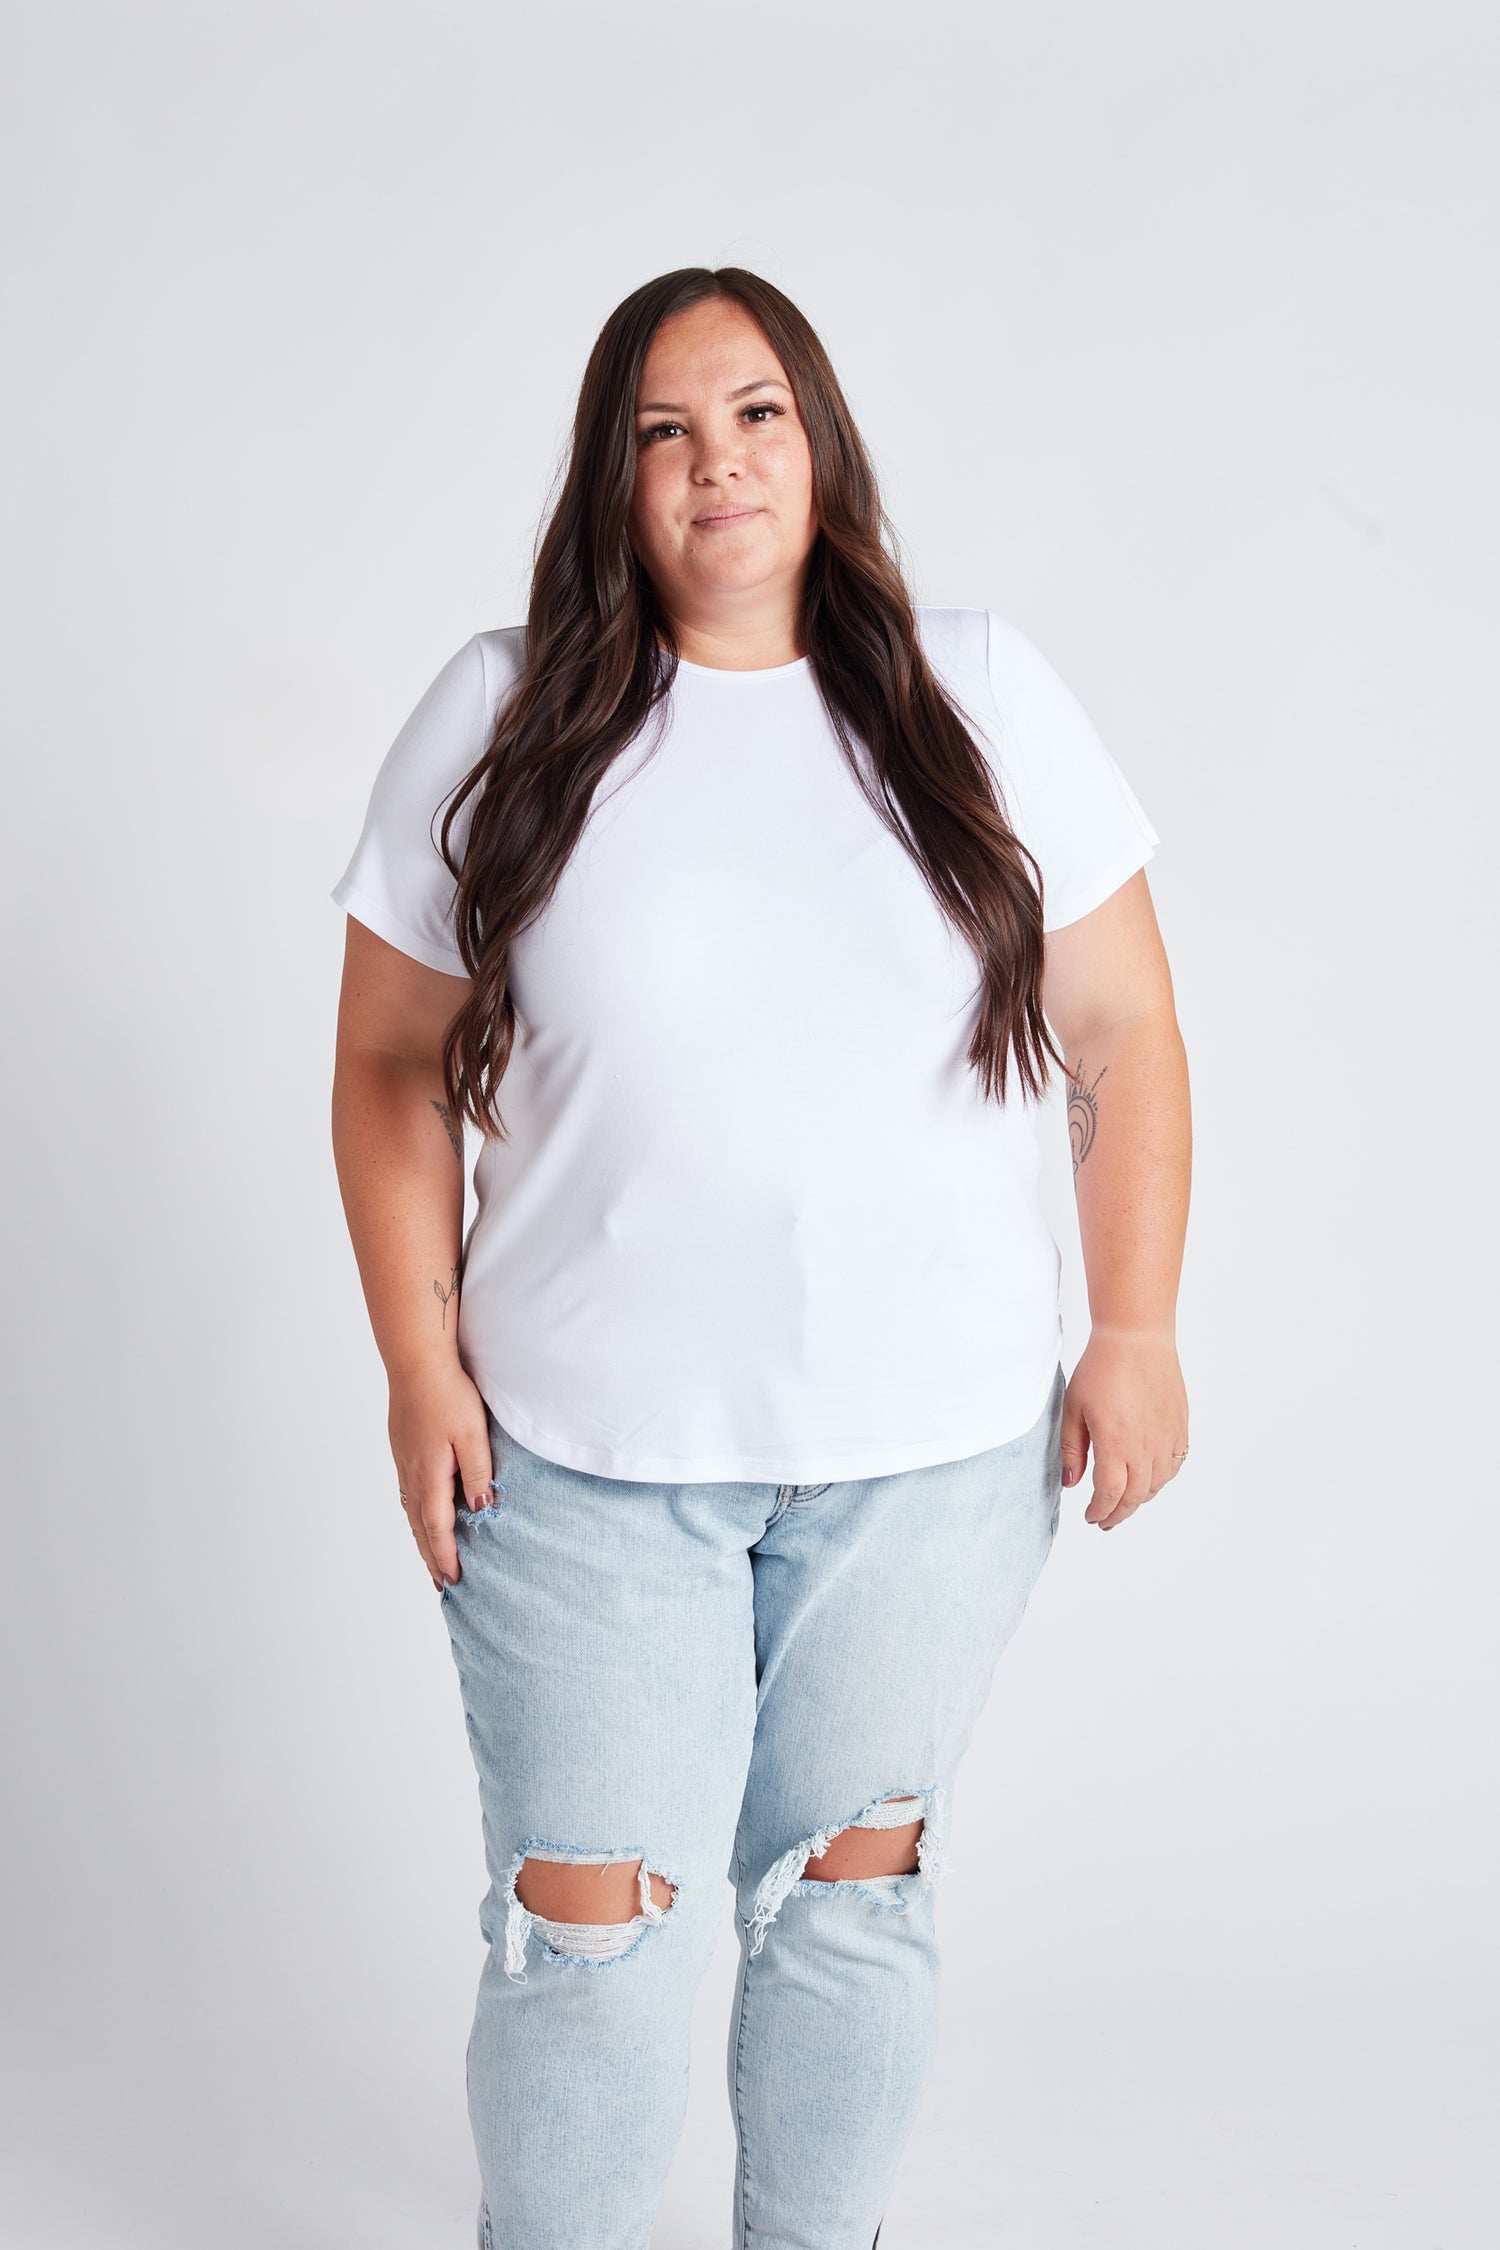 Woman wearing a white crew tshirt and jeans looking at the camera